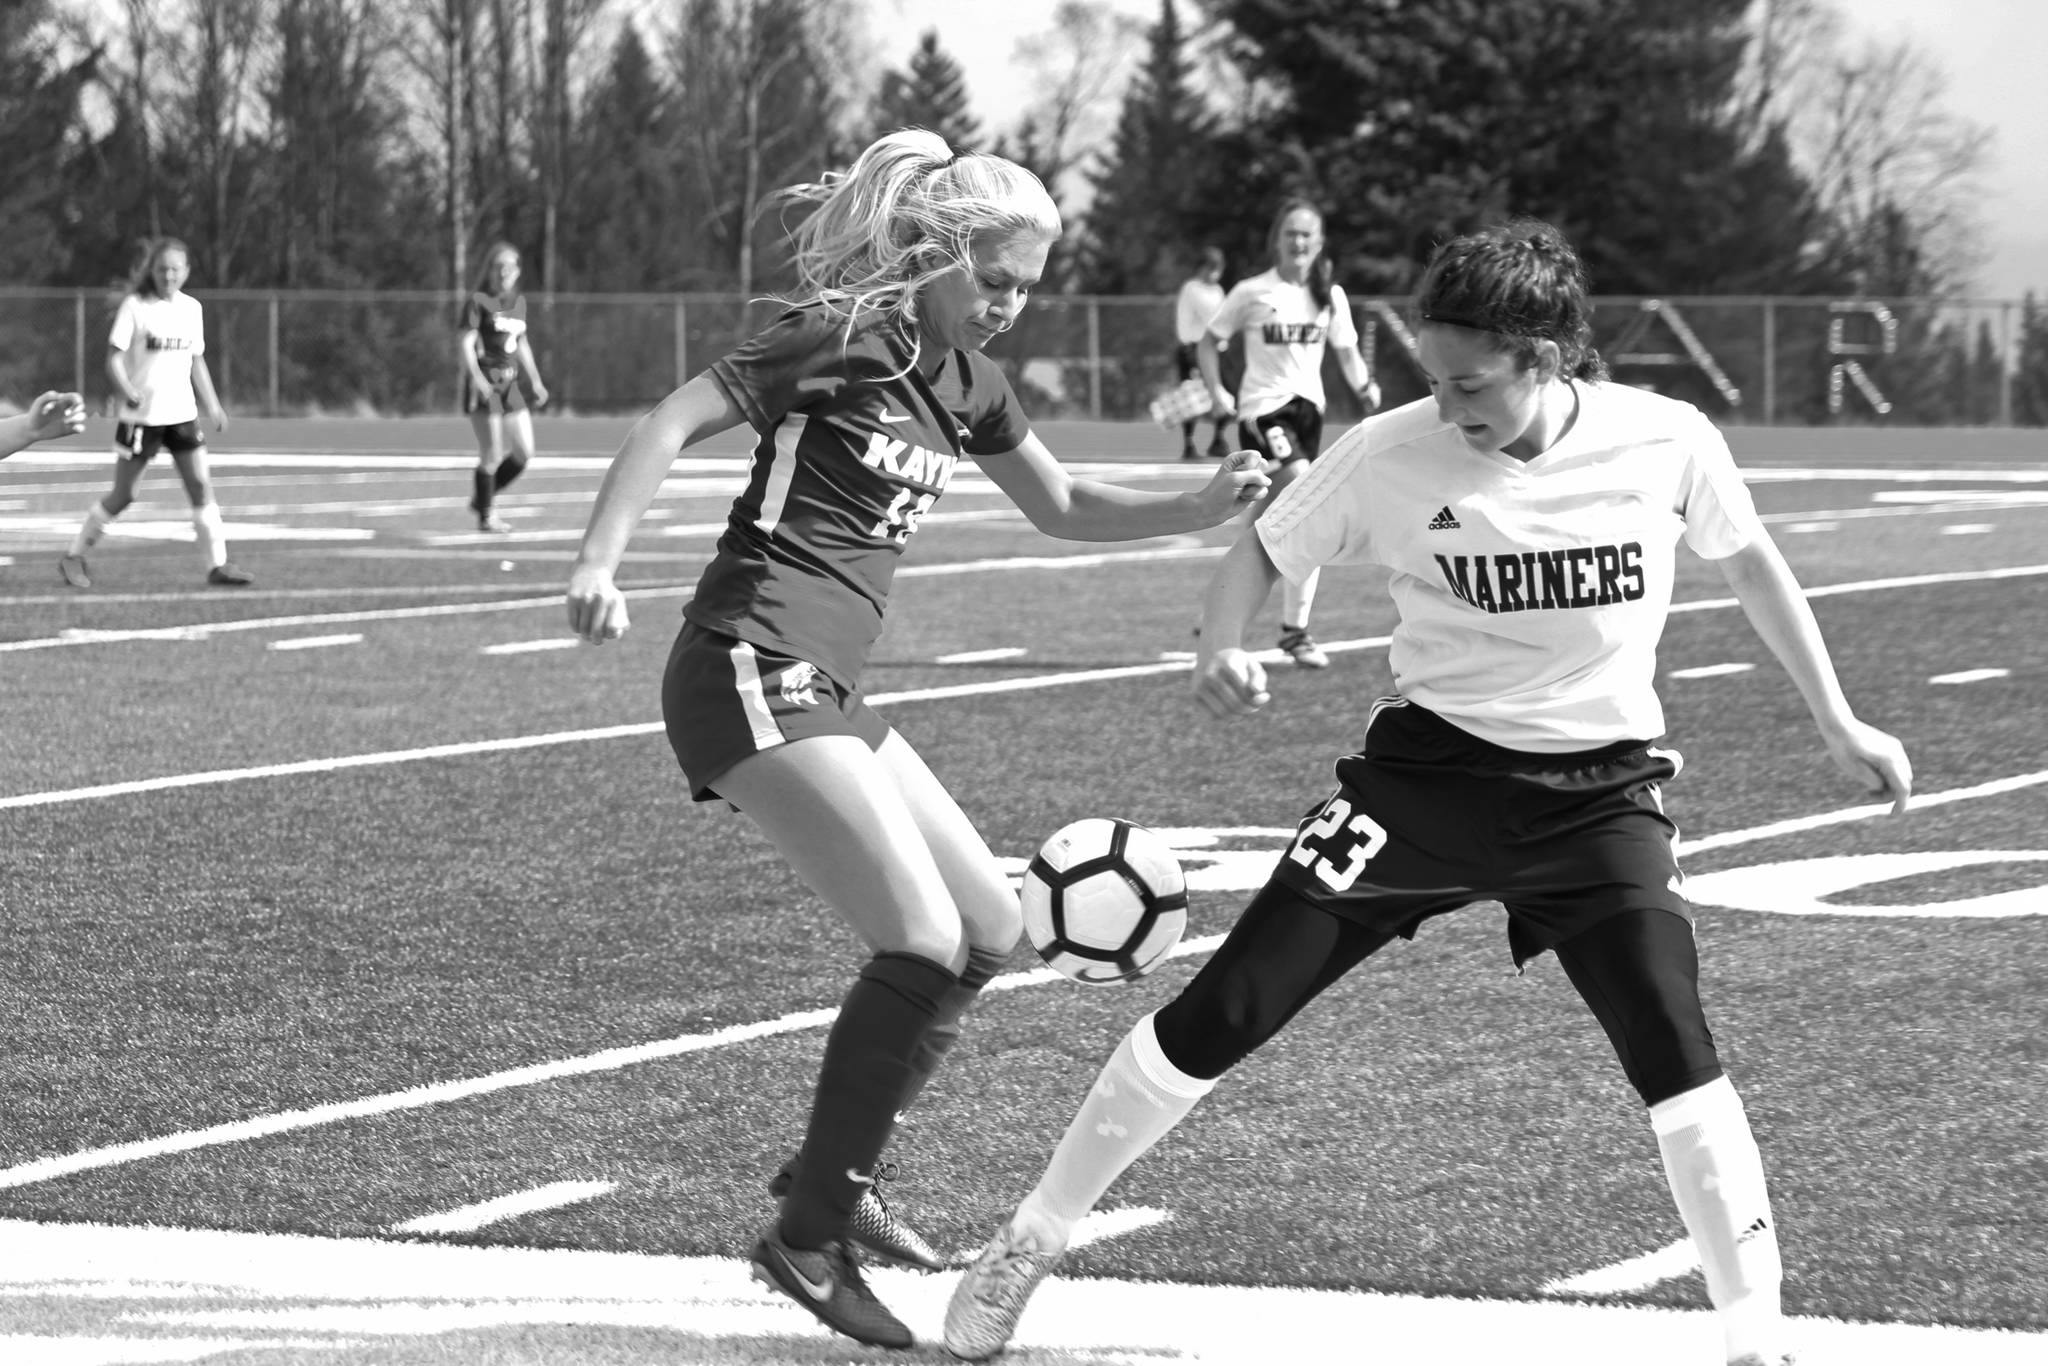 Photo by Megan Pacer/Homer News Ketchikan’s Leah Benning battles for control of the ball with Homer’s Rylyn Todd during their game Friday, May 4 at Homer High School. Ketchikan won the match 2-1.